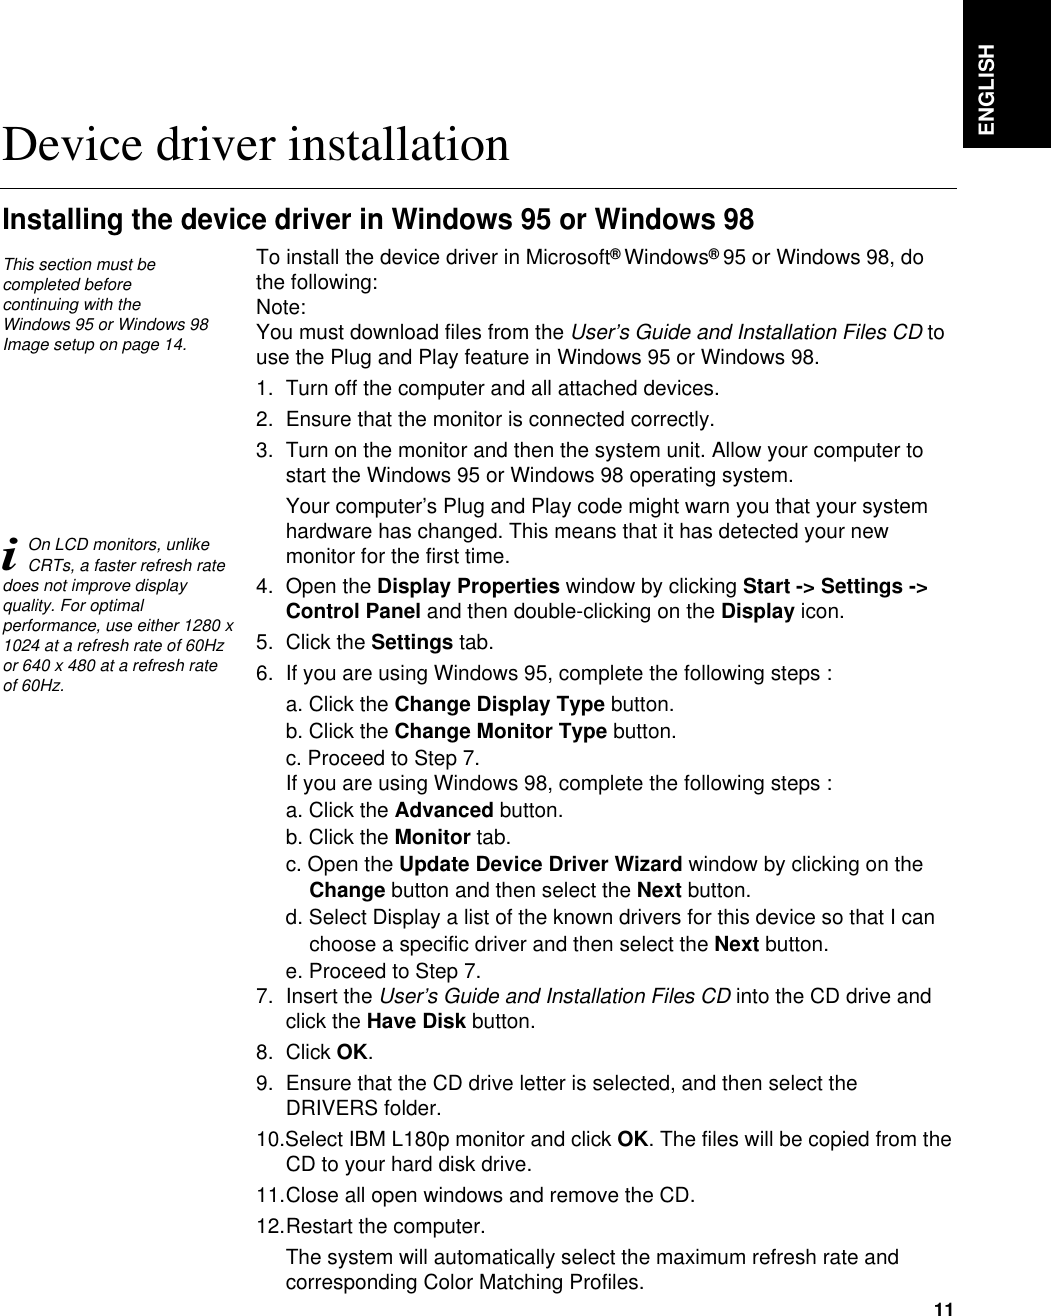 ENGLISH11To install the device driver in Microsoft®Windows®95 or Windows 98, dothe following: Note:You must download files from the User’s Guide and Installation Files CD touse the Plug and Play feature in Windows 95 or Windows 98.1. Turn off the computer and all attached devices.2. Ensure that the monitor is connected correctly.3. Turn on the monitor and then the system unit. Allow your computer tostart the Windows 95 or Windows 98 operating system.Your computer’s Plug and Play code might warn you that your systemhardware has changed. This means that it has detected your newmonitor for the first time.4. Open the Display Properties window by clicking Start -&gt; Settings -&gt;Control Panel and then double-clicking on the Display icon.5. Click the Settings tab.6. If you are using Windows 95, complete the following steps : a. Click the Change Display Type button.b. Click the Change Monitor Type button.c. Proceed to Step 7.If you are using Windows 98, complete the following steps : a. Click the Advanced button.b. Click the Monitor tab.c. Open the Update Device Driver Wizard window by clicking on theChange button and then select the Next button.d. Select Display a list of the known drivers for this device so that I canchoose a specific driver and then select the Next button. e. Proceed to Step 7.7. Insert the User’s Guide and Installation Files CD into the CD drive andclick the Have Disk button.8. Click OK.9. Ensure that the CD drive letter is selected, and then select theDRIVERS folder.10.Select IBM L180p monitor and click OK. The files will be copied from theCD to your hard disk drive.11.Close all open windows and remove the CD.12.Restart the computer.The system will automatically select the maximum refresh rate andcorresponding Color Matching Profiles. Device driver installationInstalling the device driver in Windows 95 or Windows 98This section must becompleted before continuing with the Windows 95 or Windows 98Image setup on page 14.iOn LCD monitors, unlikeCRTs, a faster refresh ratedoes not improve displayquality. For optimalperformance, use either 1280 x1024 at a refresh rate of 60Hzor 640 x 480 at a refresh rateof 60Hz.